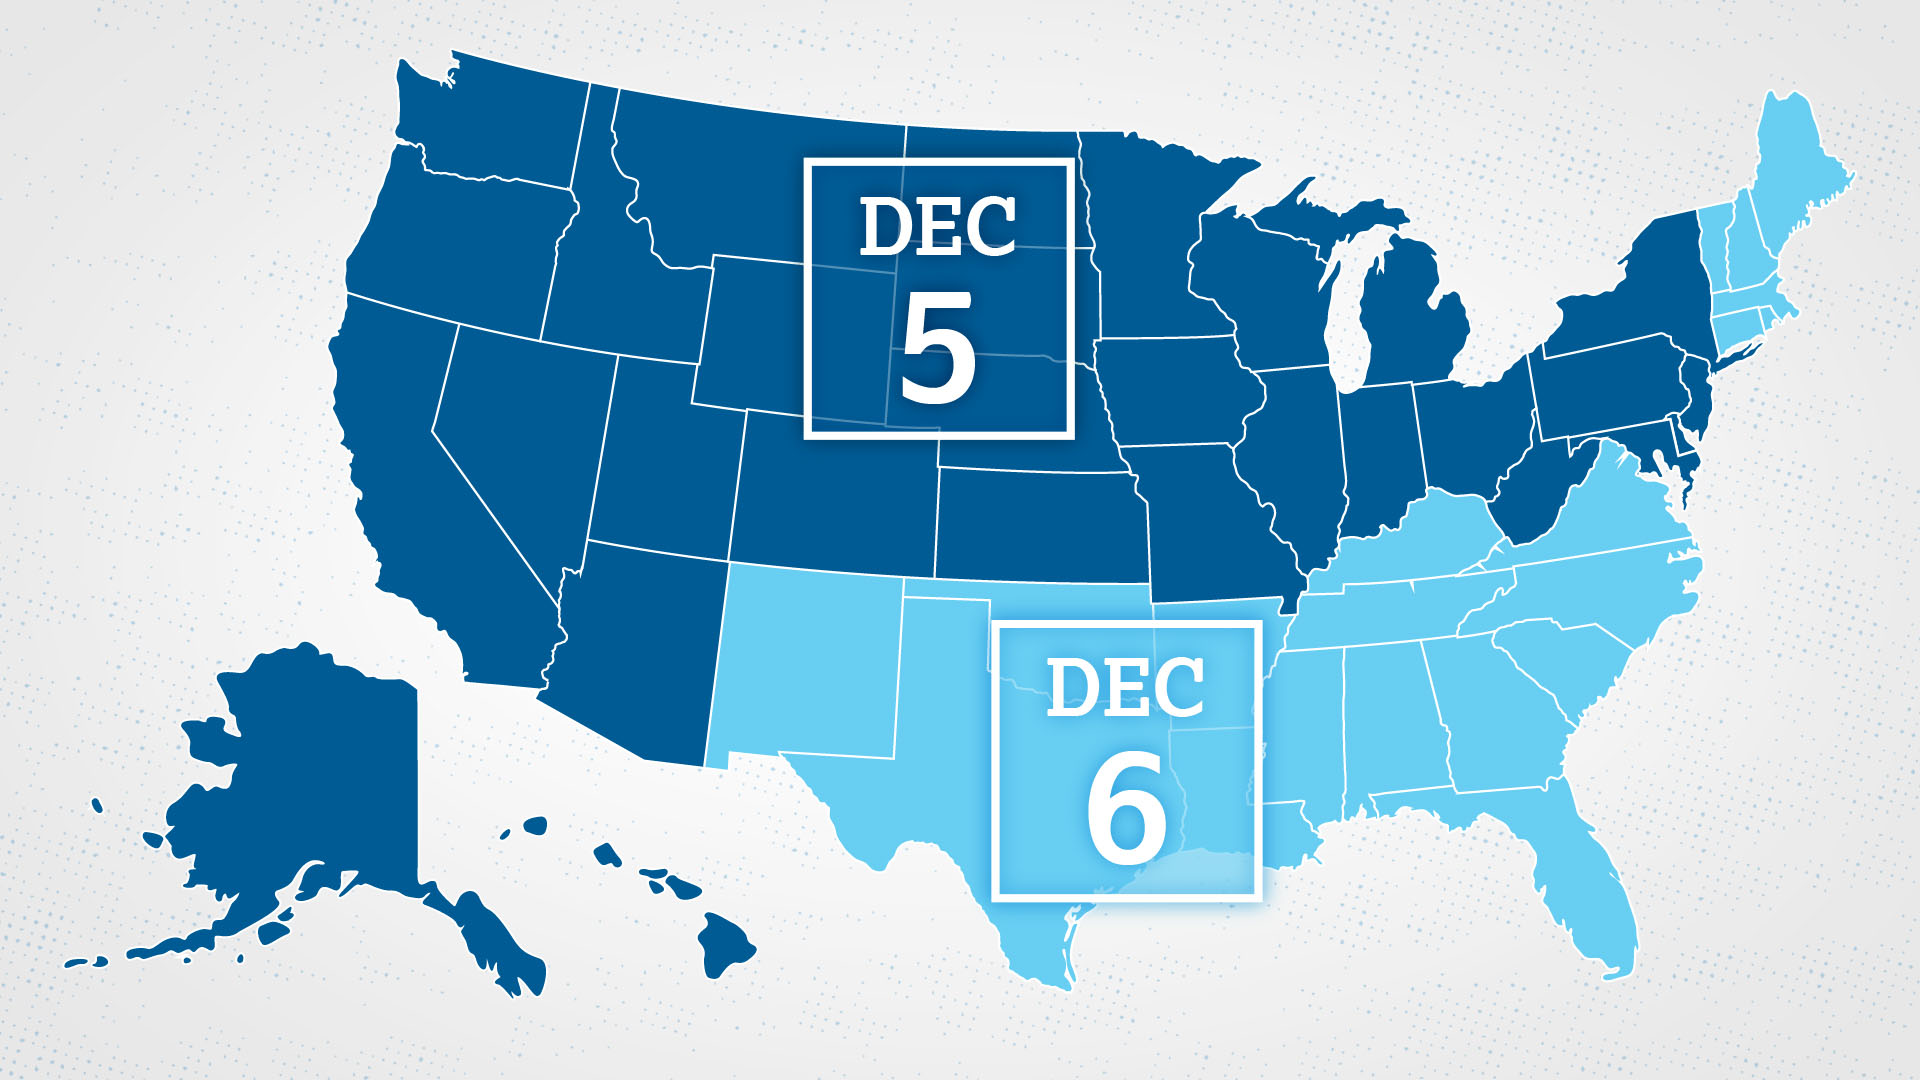 map of United States divided into 2 different groups of states, one for December 5, the other for December 6